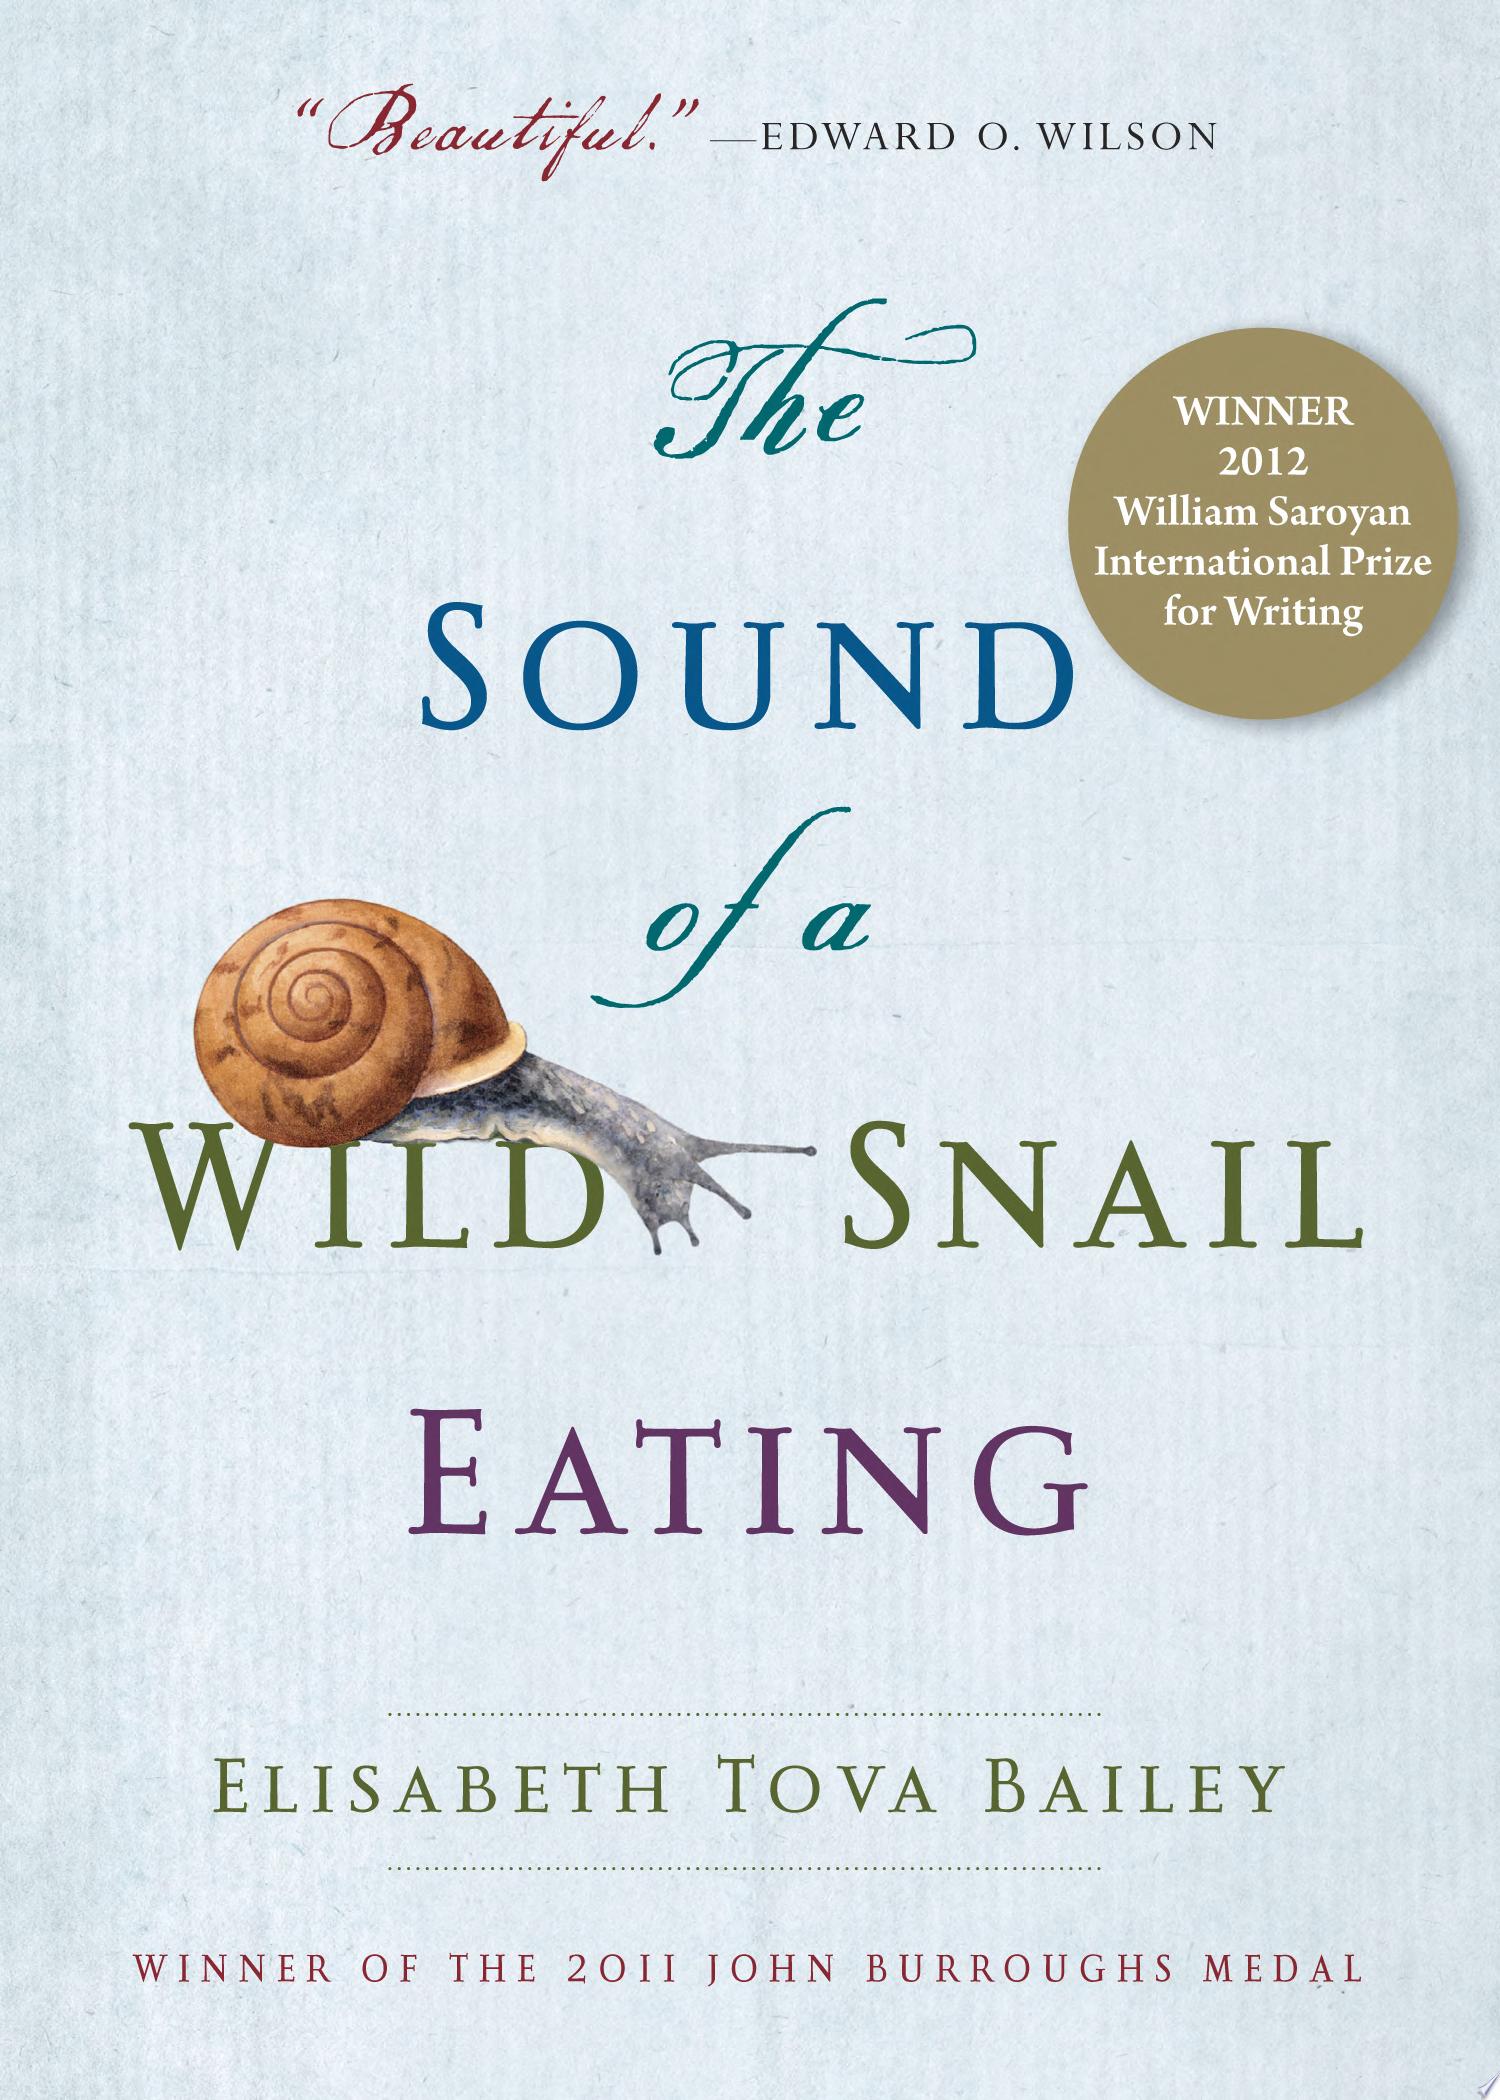 Image for "The Sound of a Wild Snail Eating"